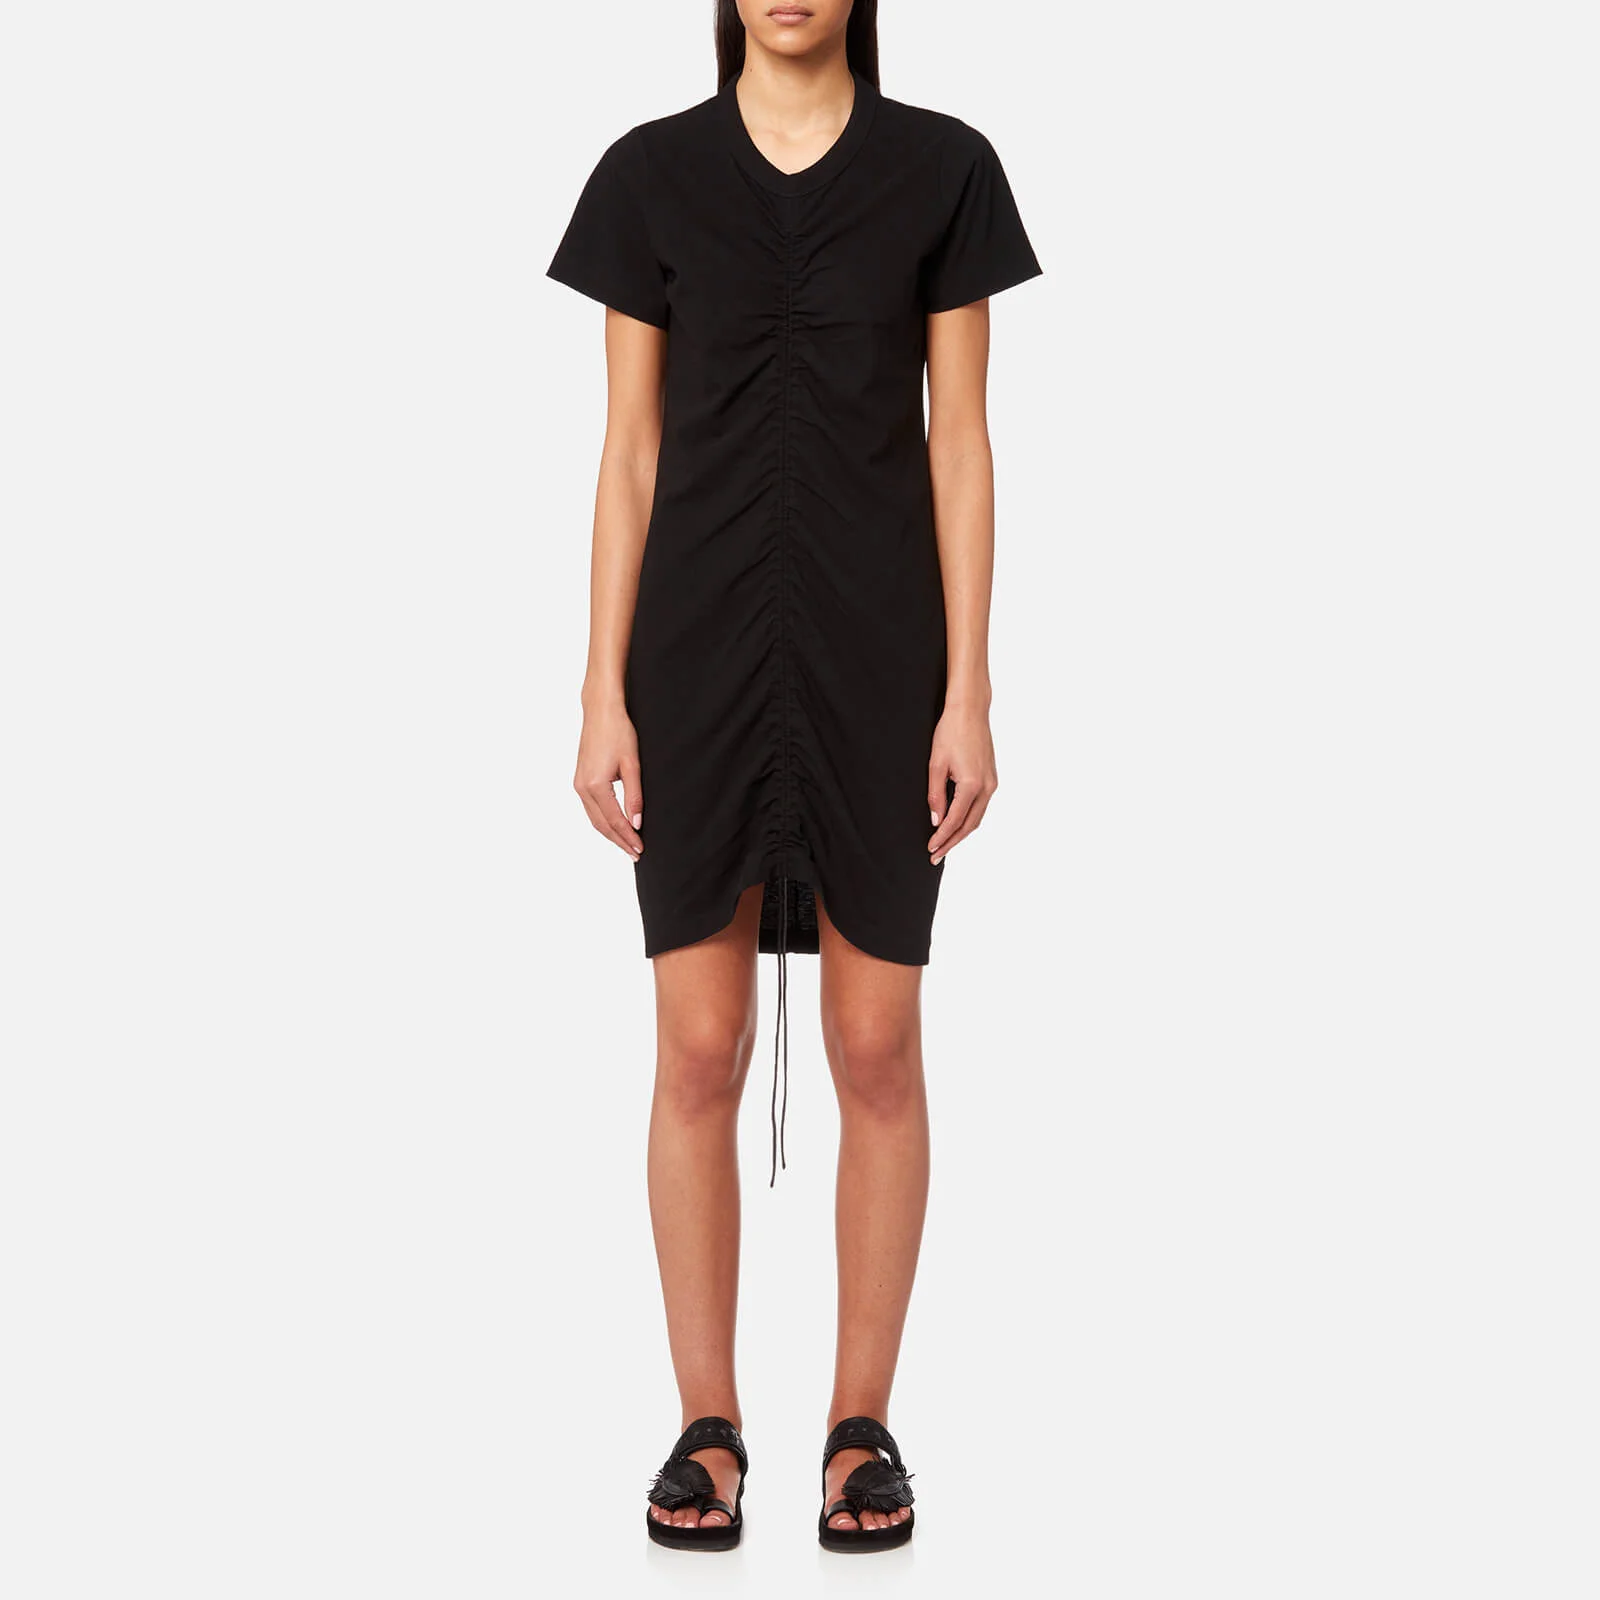 T by Alexander Wang Women's High Twist Dress with Gathered Front - Black Image 1